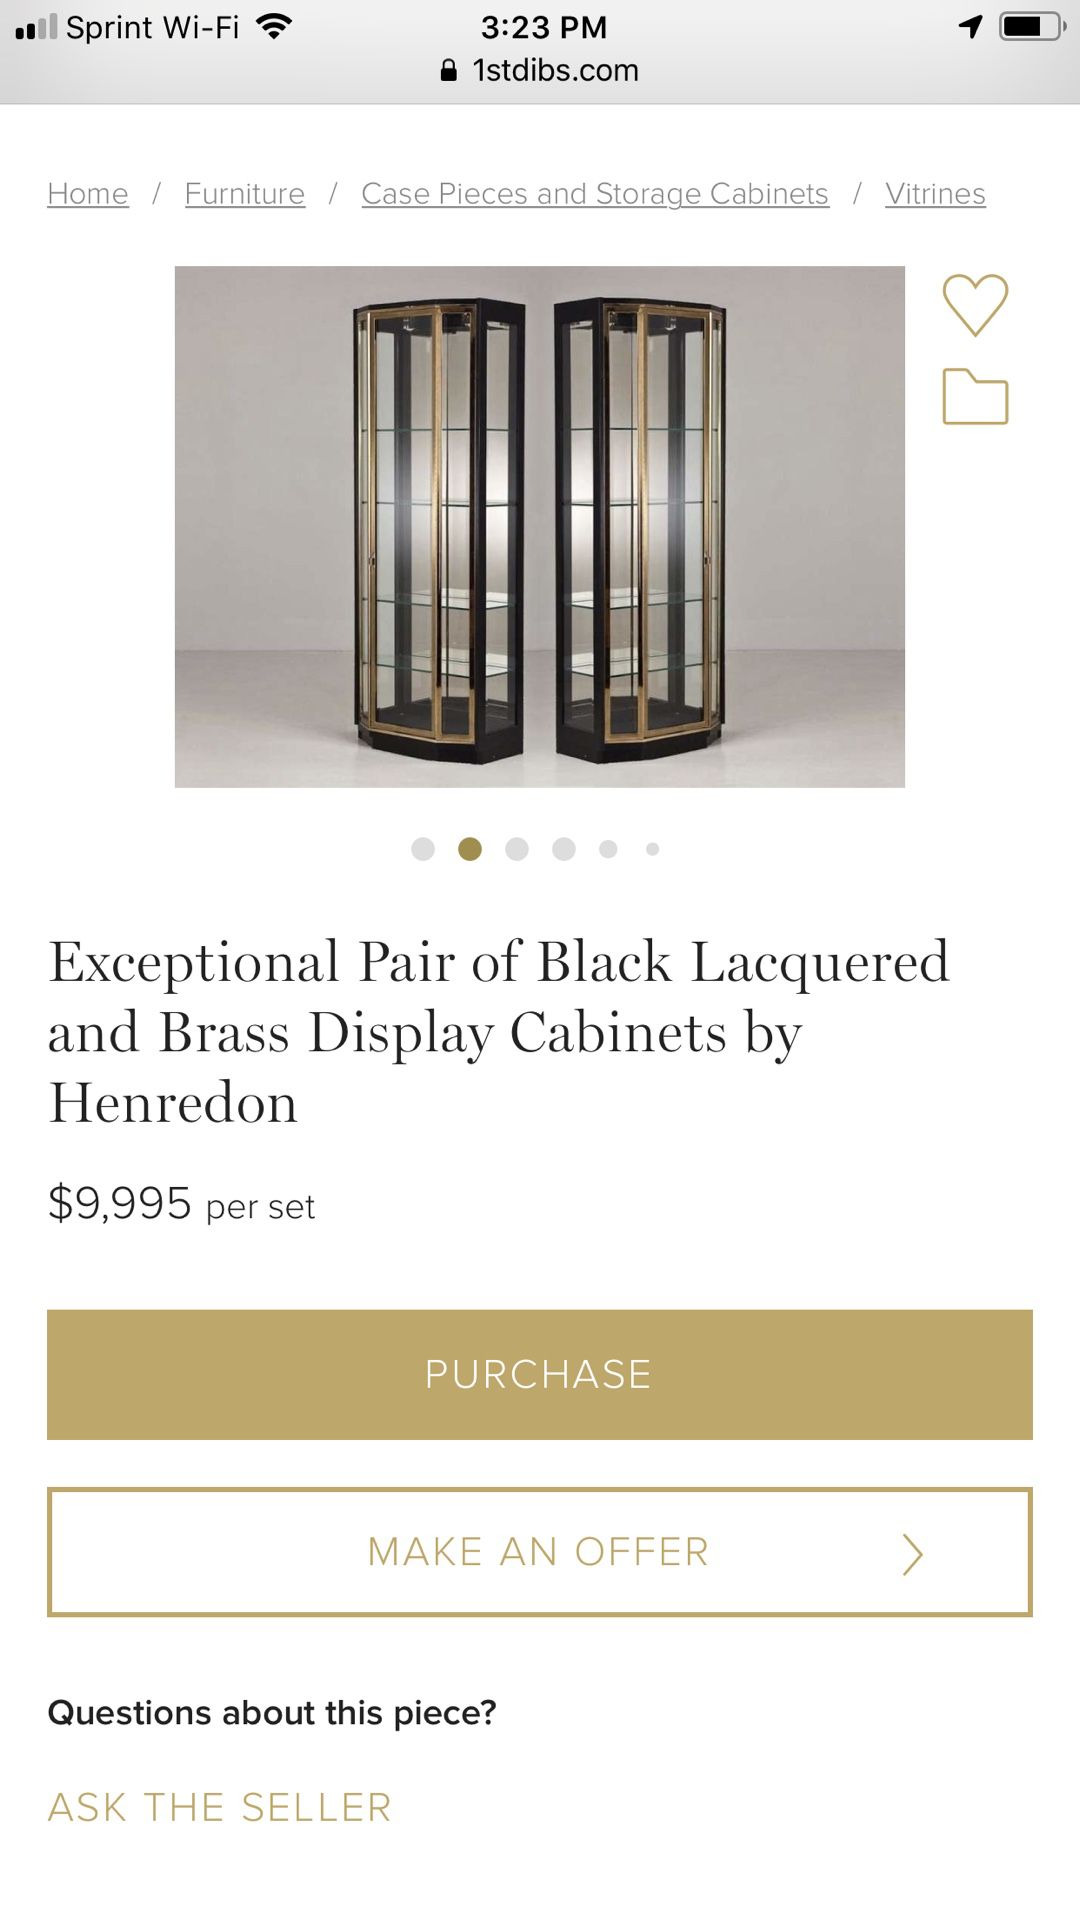 Exceptional Pair of Black Lacquered and Brass Display Cabinets by Henredon